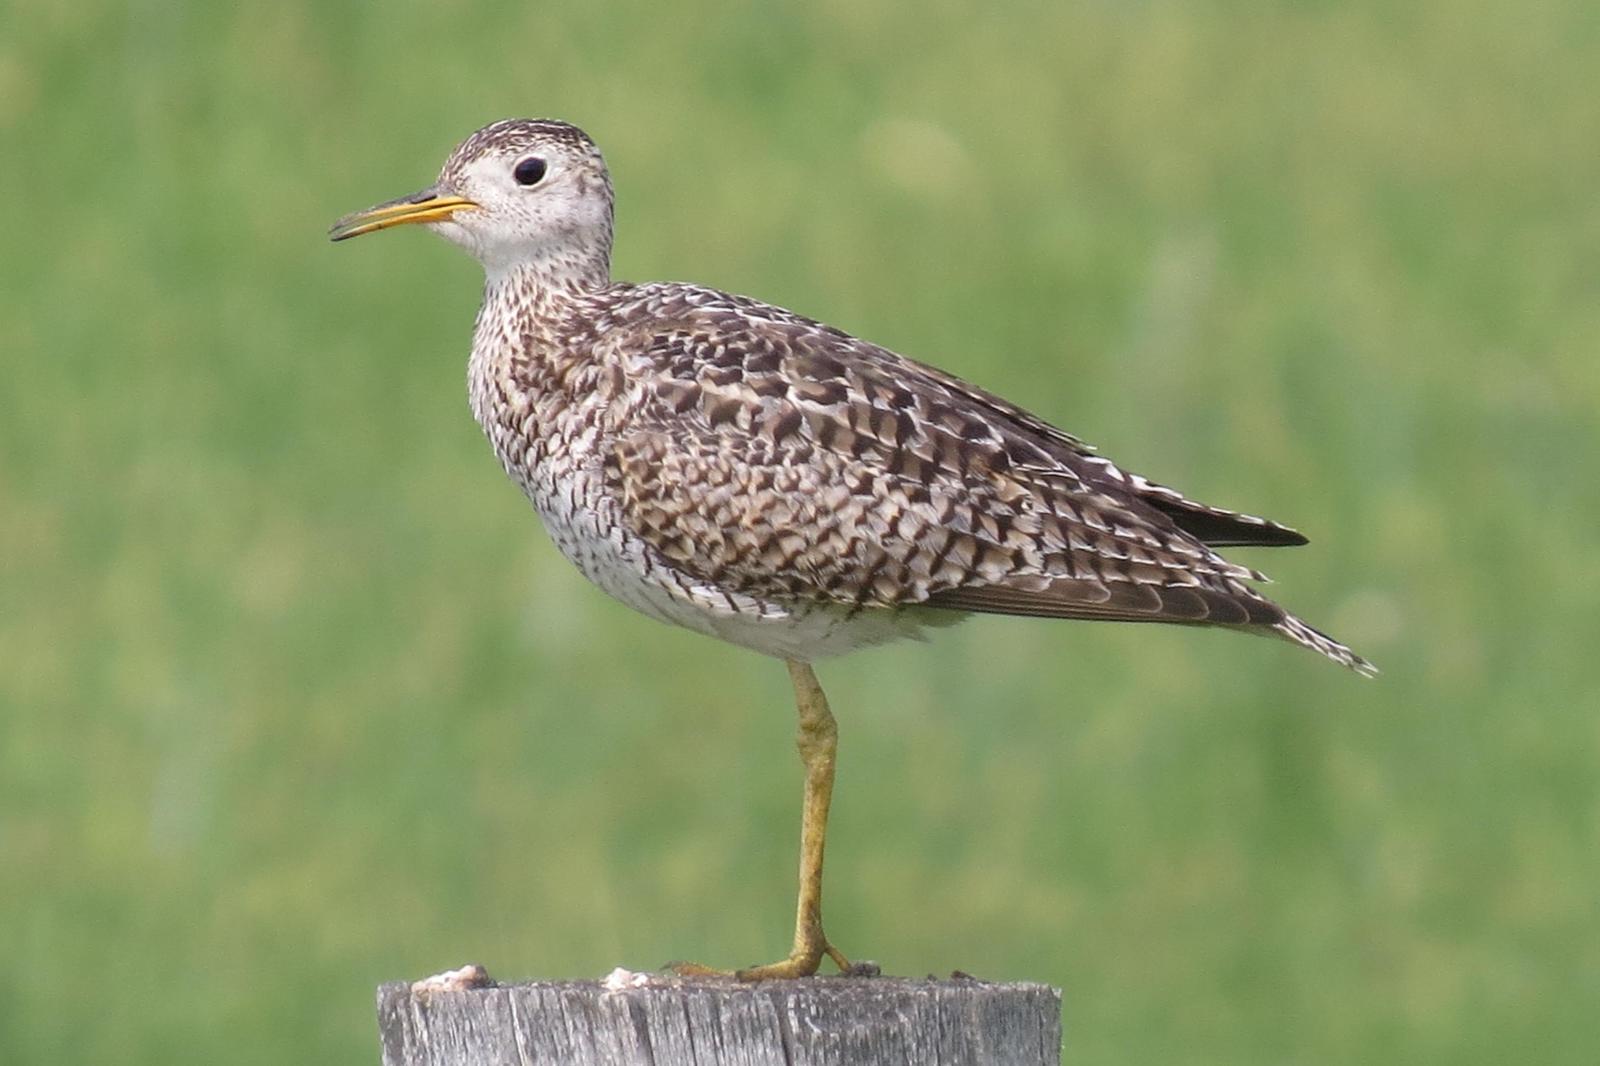 Upland Sandpiper Photo by Enid Bachman